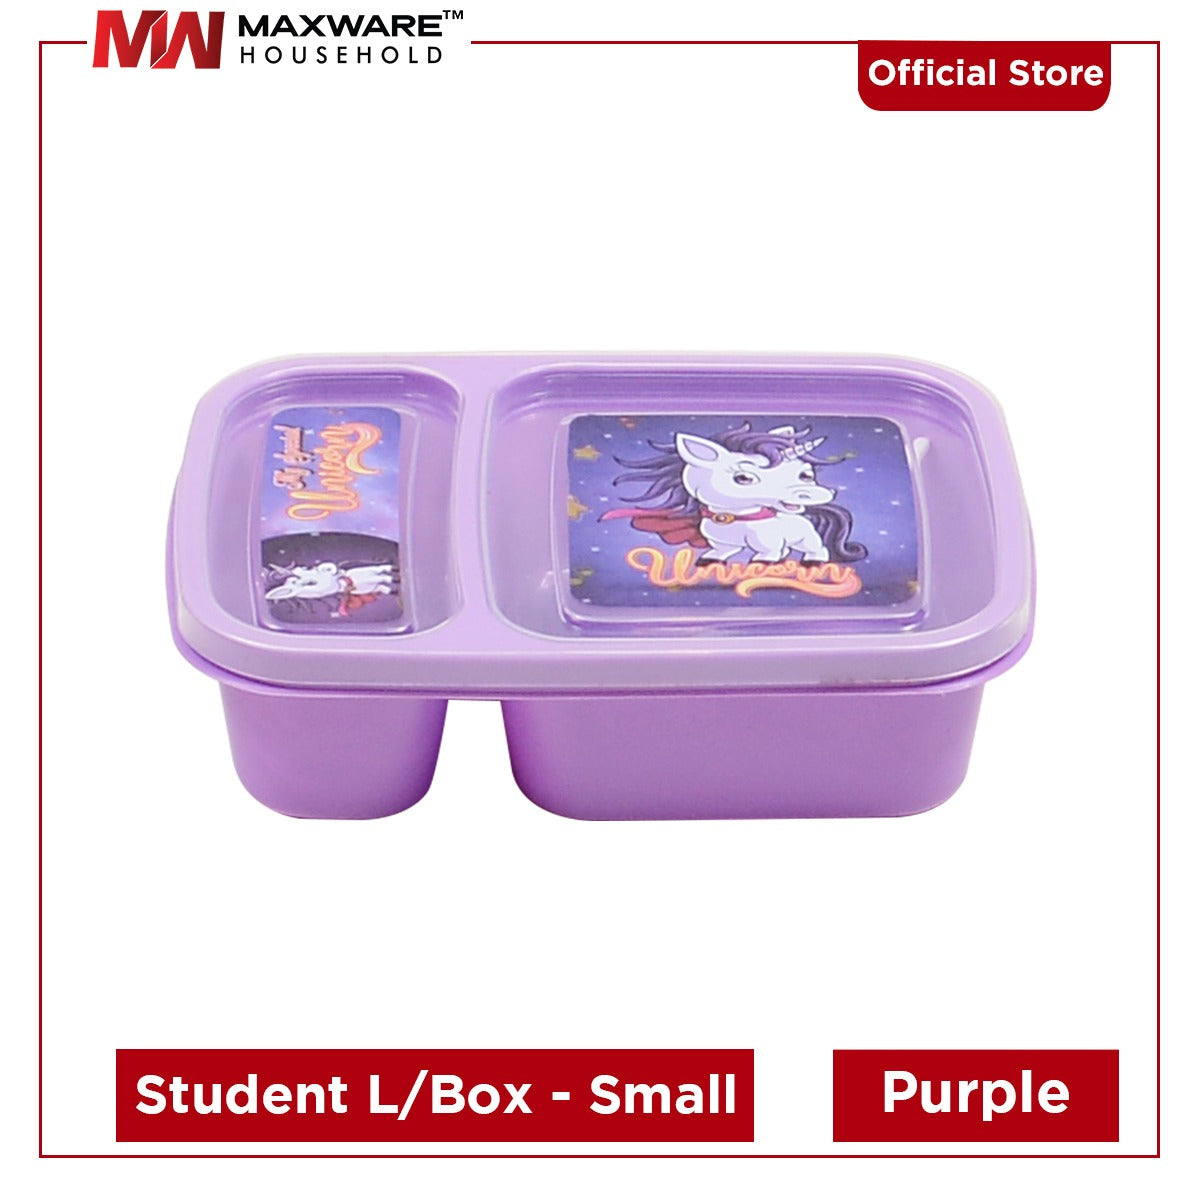 Student Lunch Box Small ( 700 ml)